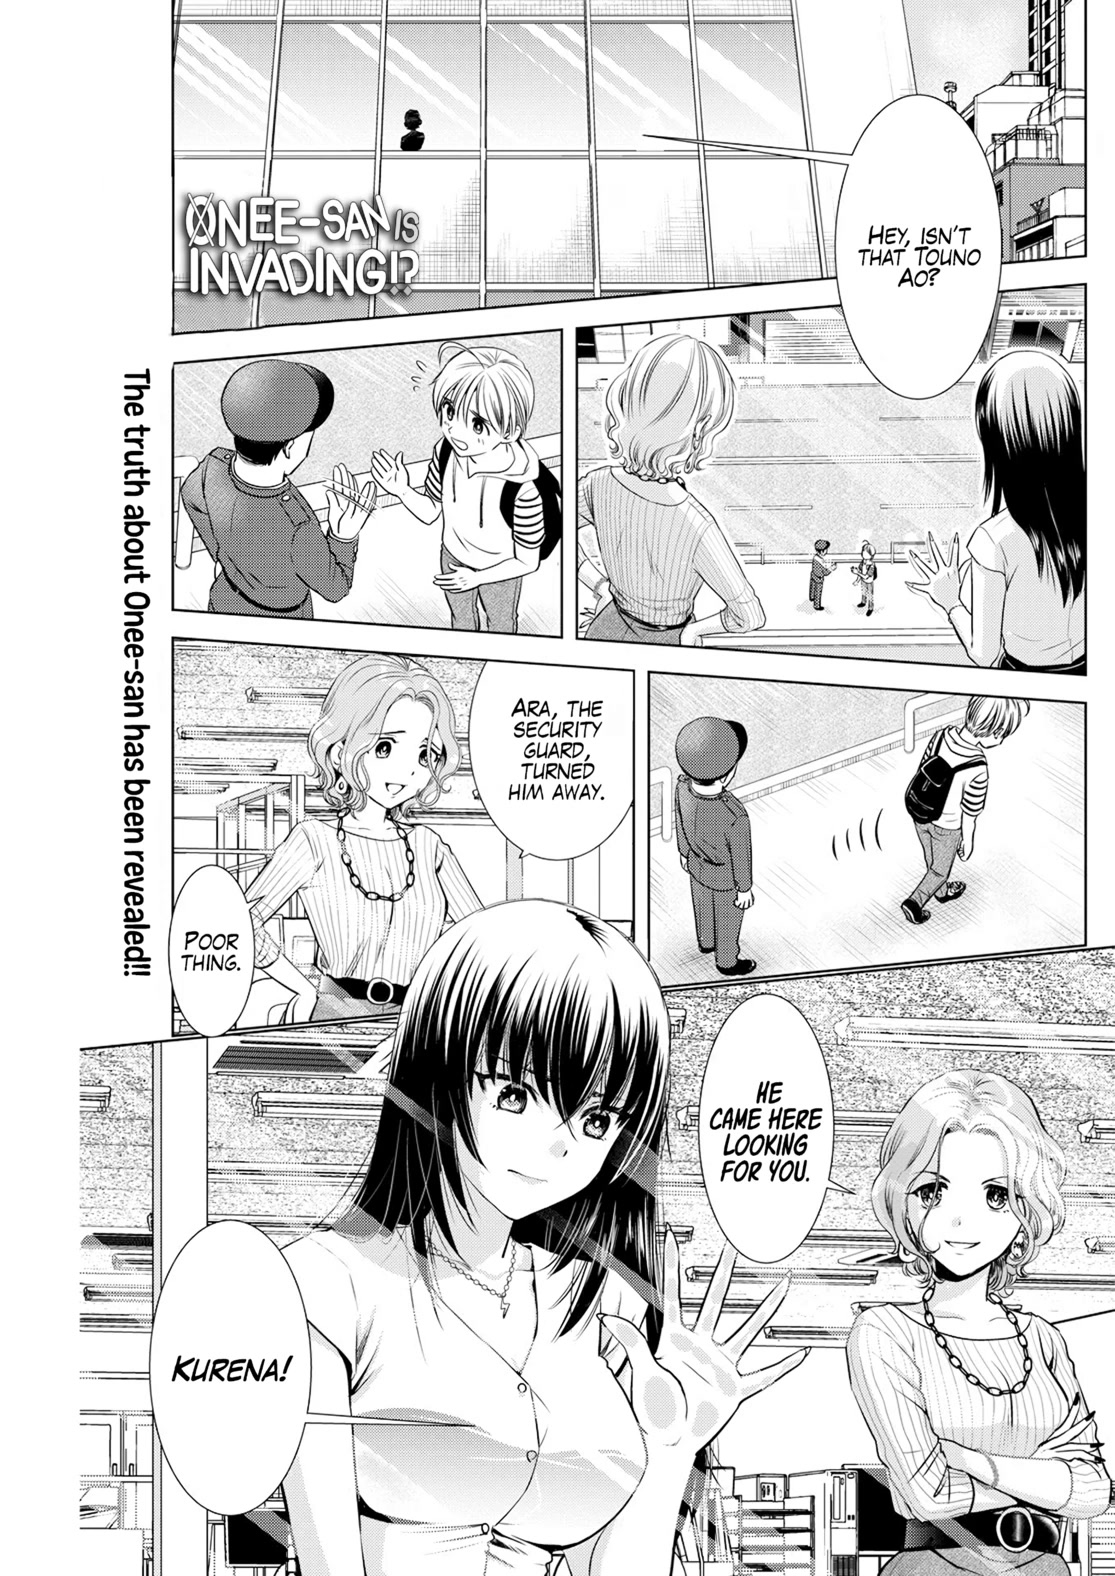 Onee-San Is Invading!? - Page 2